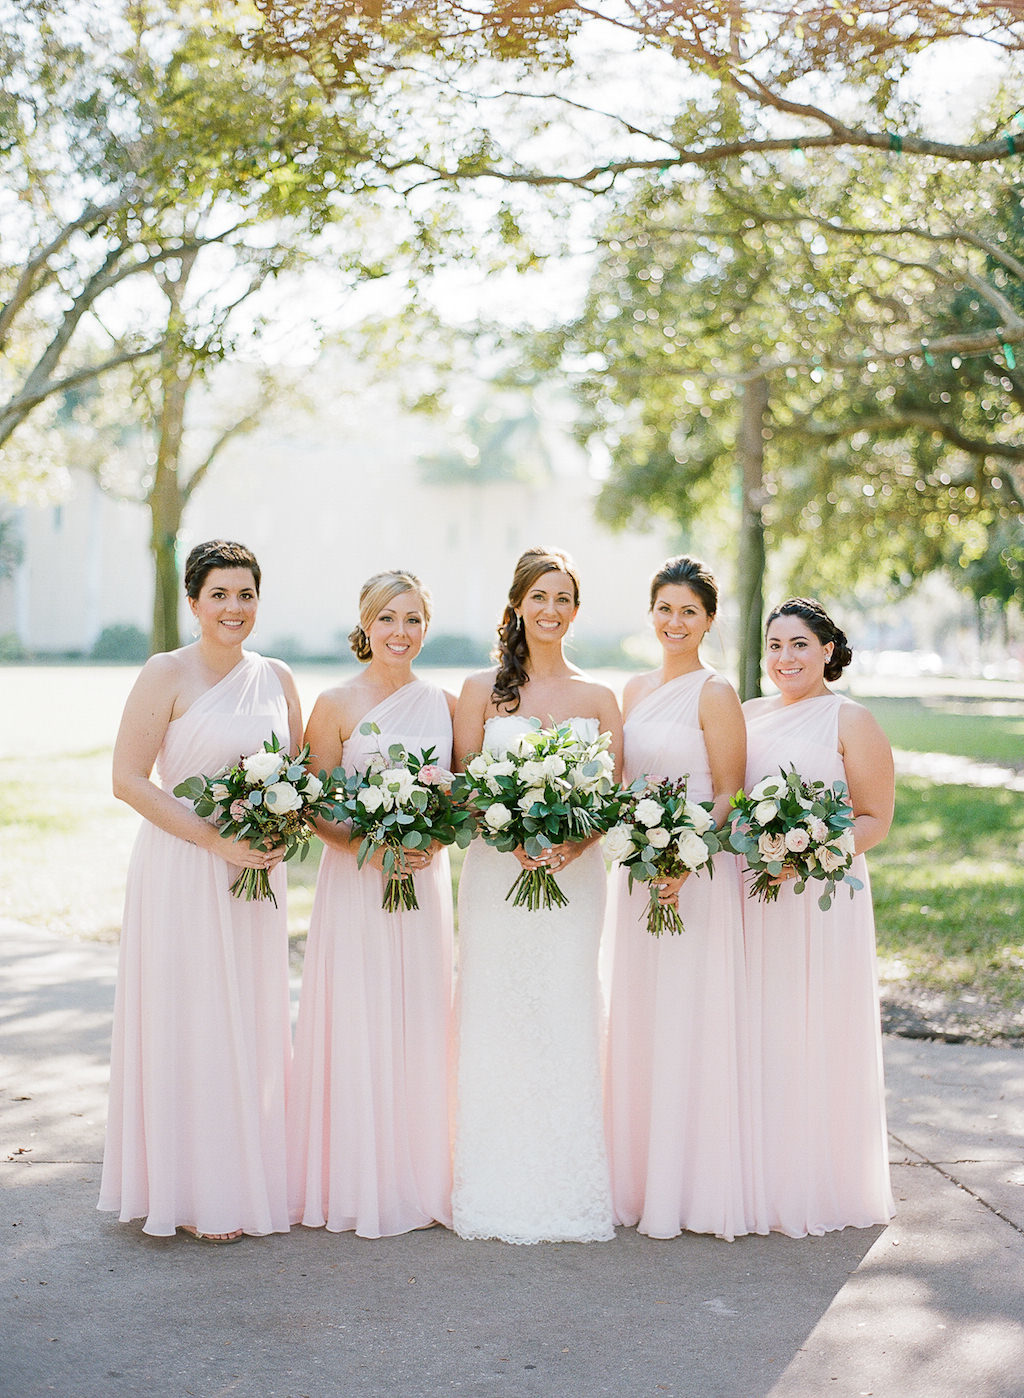 Outdoor Bridal Party Portrait with Asymmetrical One Shoulder Floor Length Blush Pink Bridesmaids Dresses and White with Greenery Bouquets | St. Petersburg Wedding Hair and Makeup Artist Michele Renee the Studio